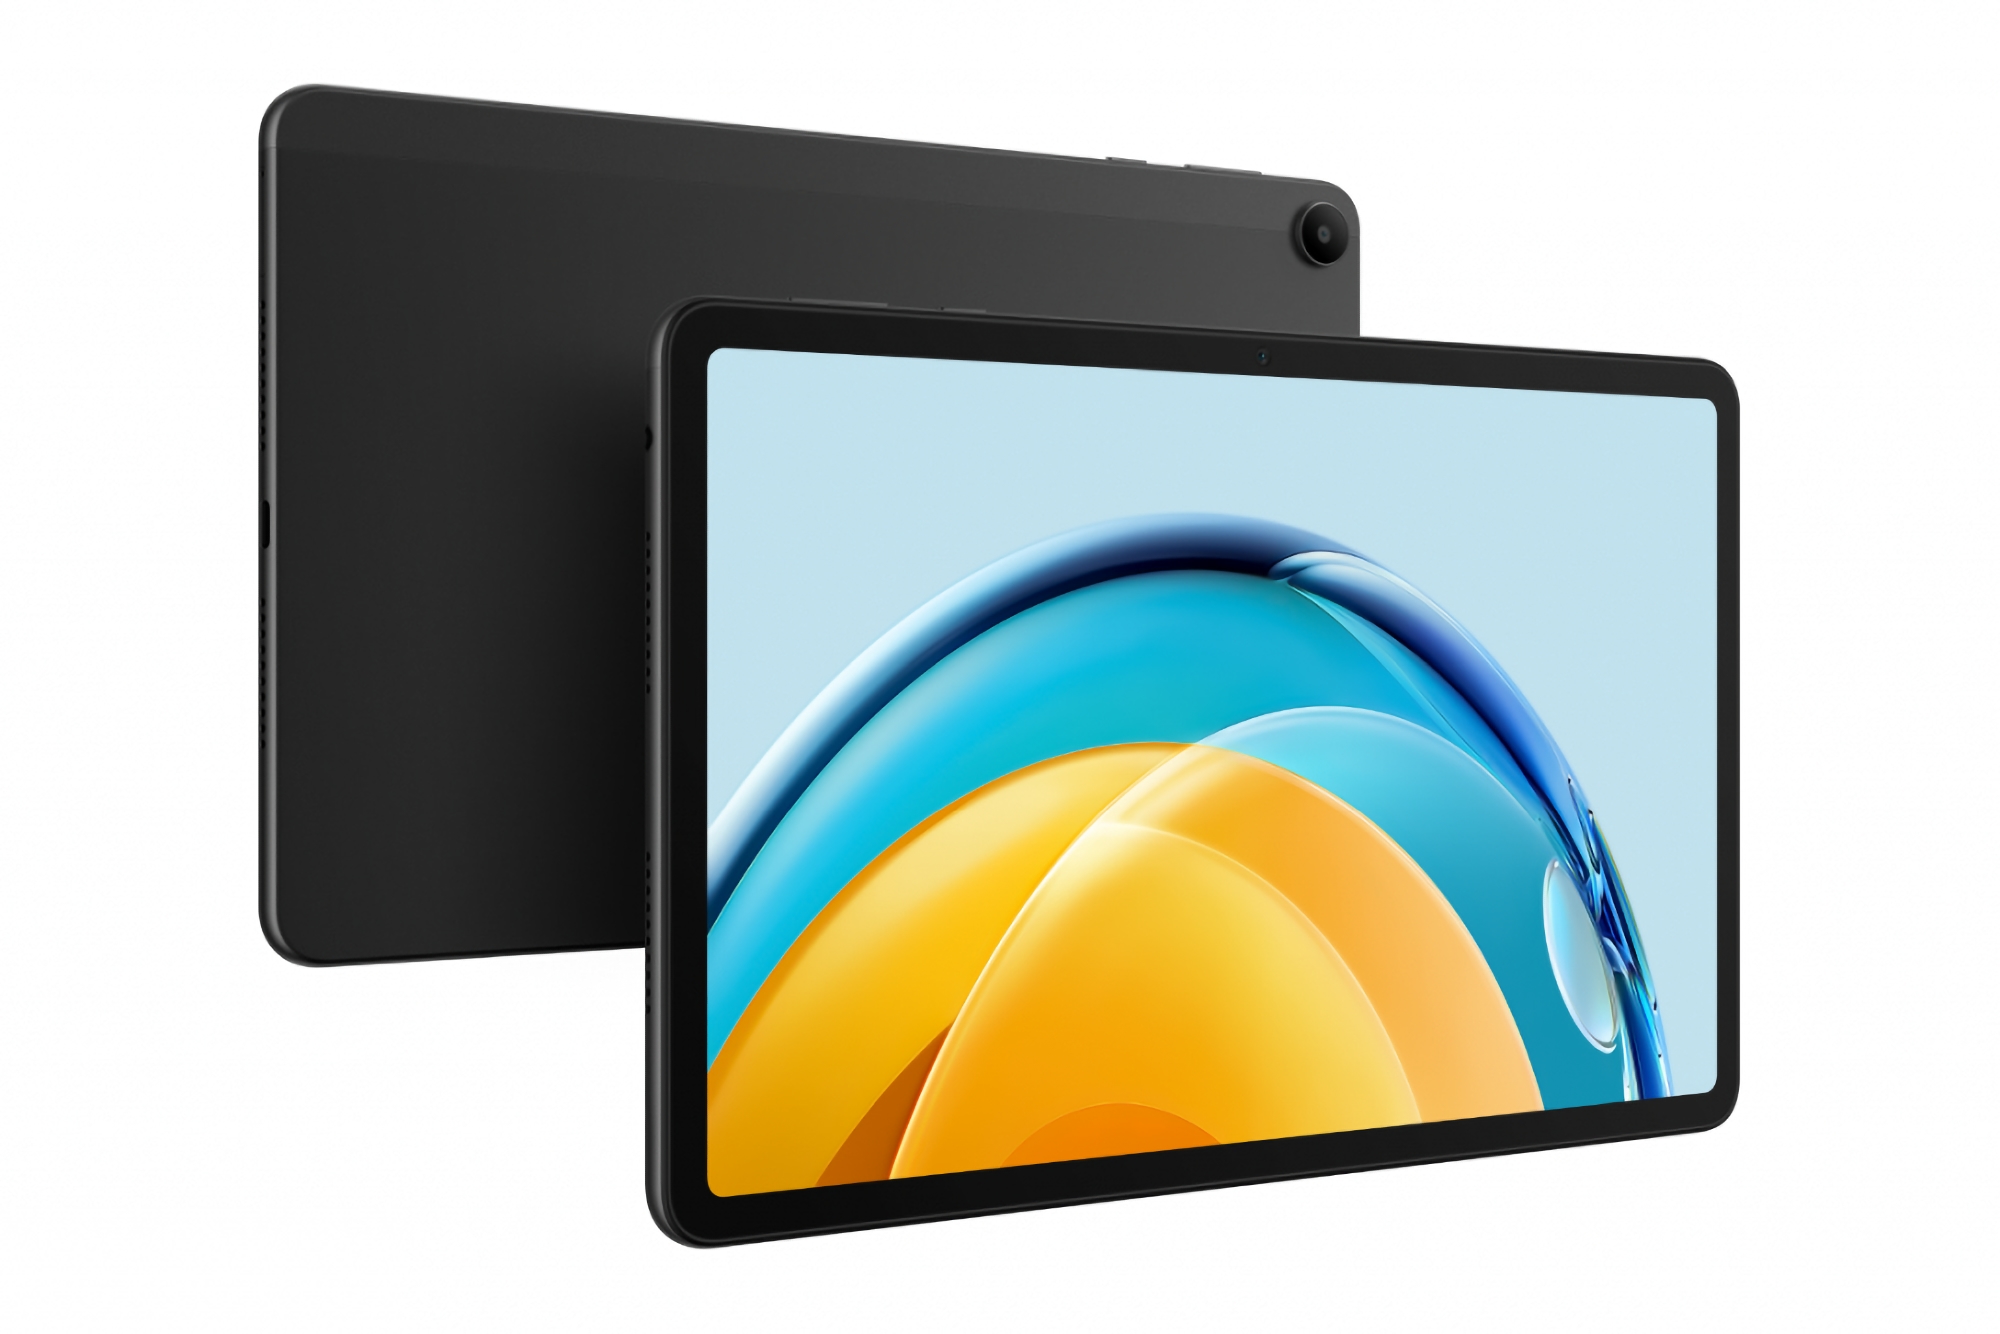 Huawei unveils MatePad SE 10.4 with 2K display and Snapdragon 680 chip for $176